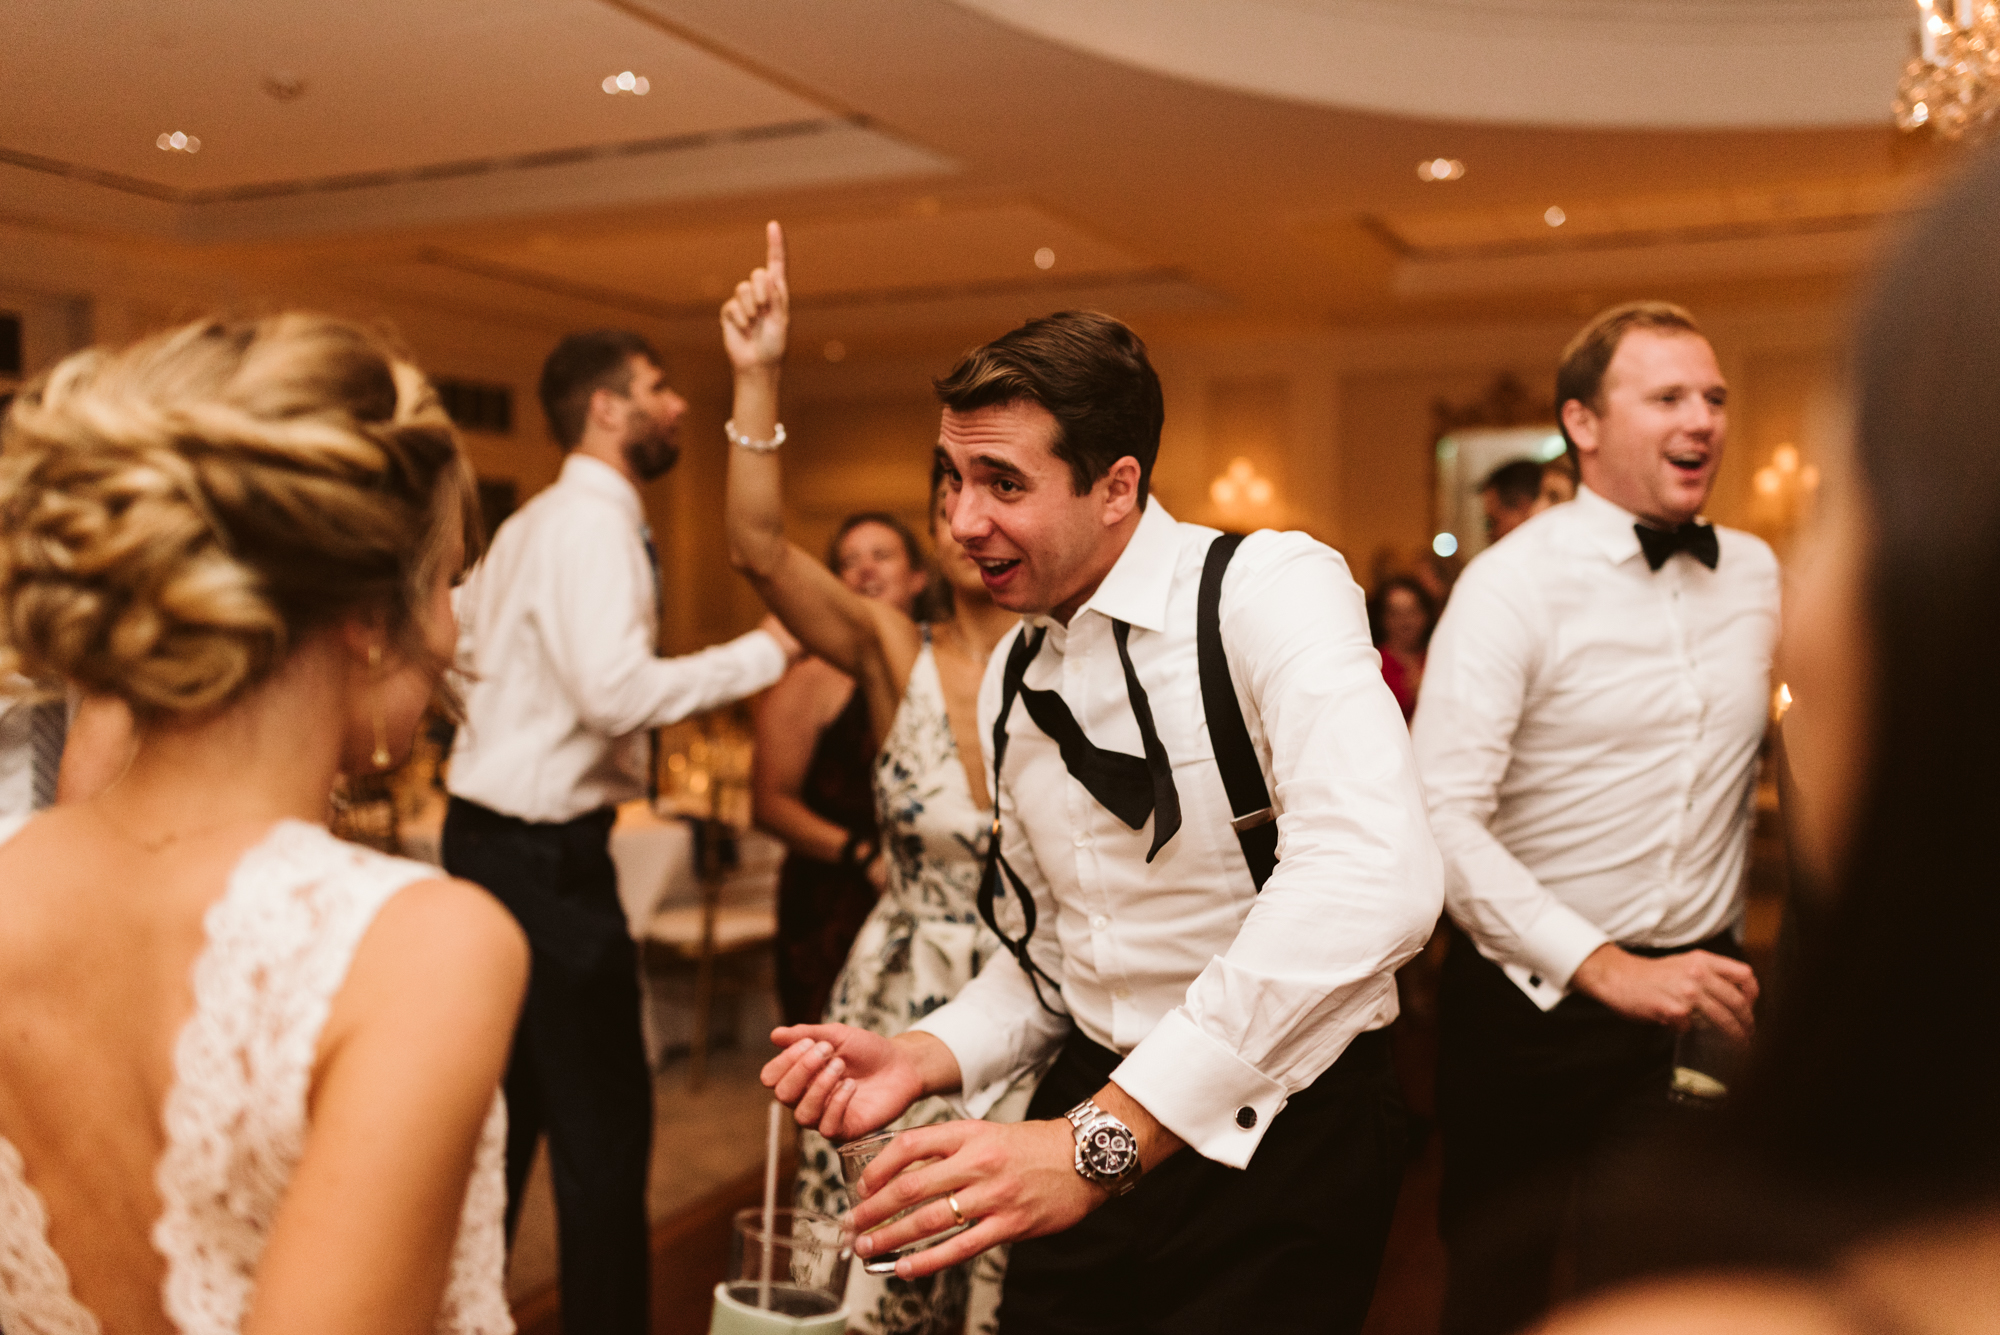 Elegant, Columbia Country Club, Chevy Chase Maryland, Baltimore Wedding Photographer, Classic, Traditional, Groomsmen Dancing with Bride at Wedding Reception